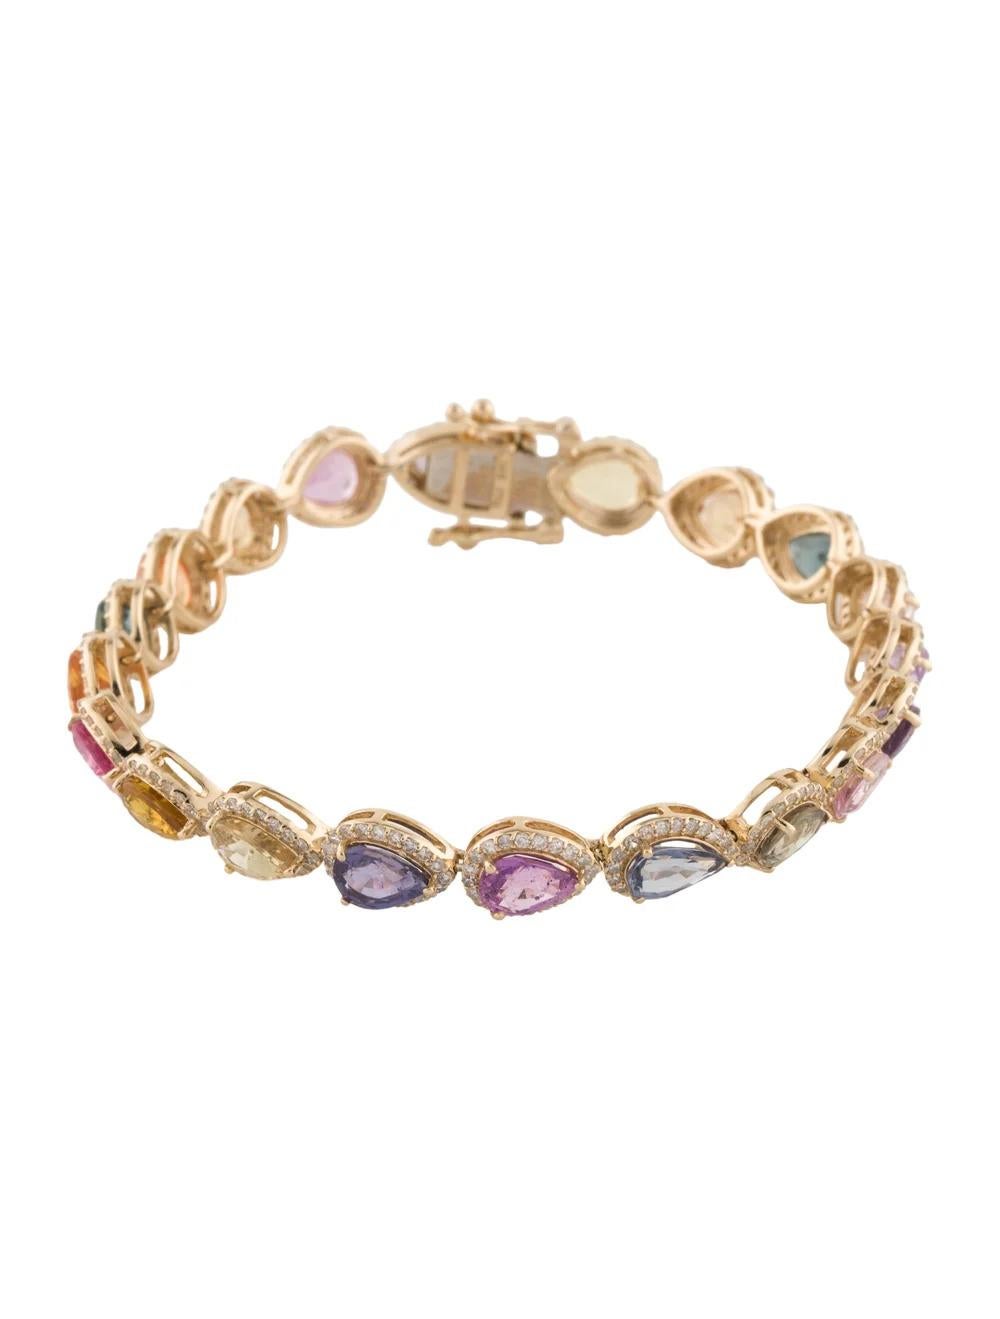 Elevate your ensemble with this stunning 14K Yellow Gold Bracelet, adorned with exquisite gemstones, perfect for any occasion.

Specifications:

* Material: 14K Yellow Gold
* Gemstone: Pear Modified Brilliant Sapphire
* Carat Weight: 14.00
* Stone